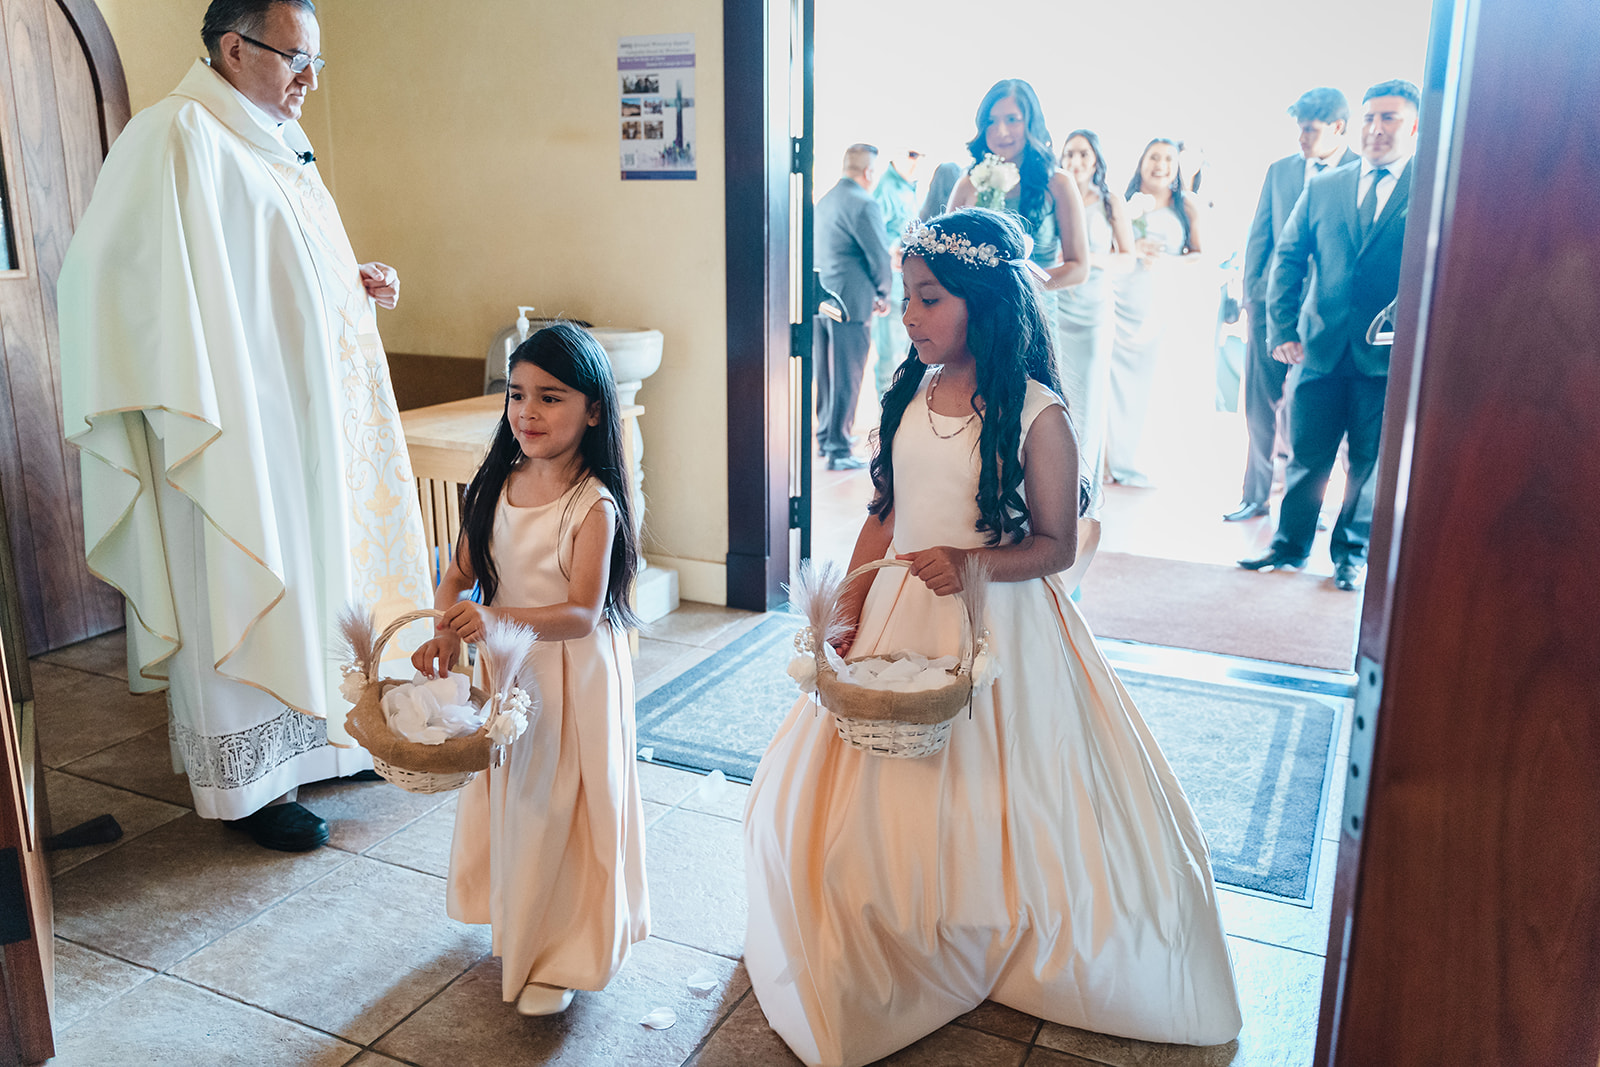 Breathtaking church ceremony capturing the essence of Nallely and Ansony's wedding, showcasing the couple's joy and the 